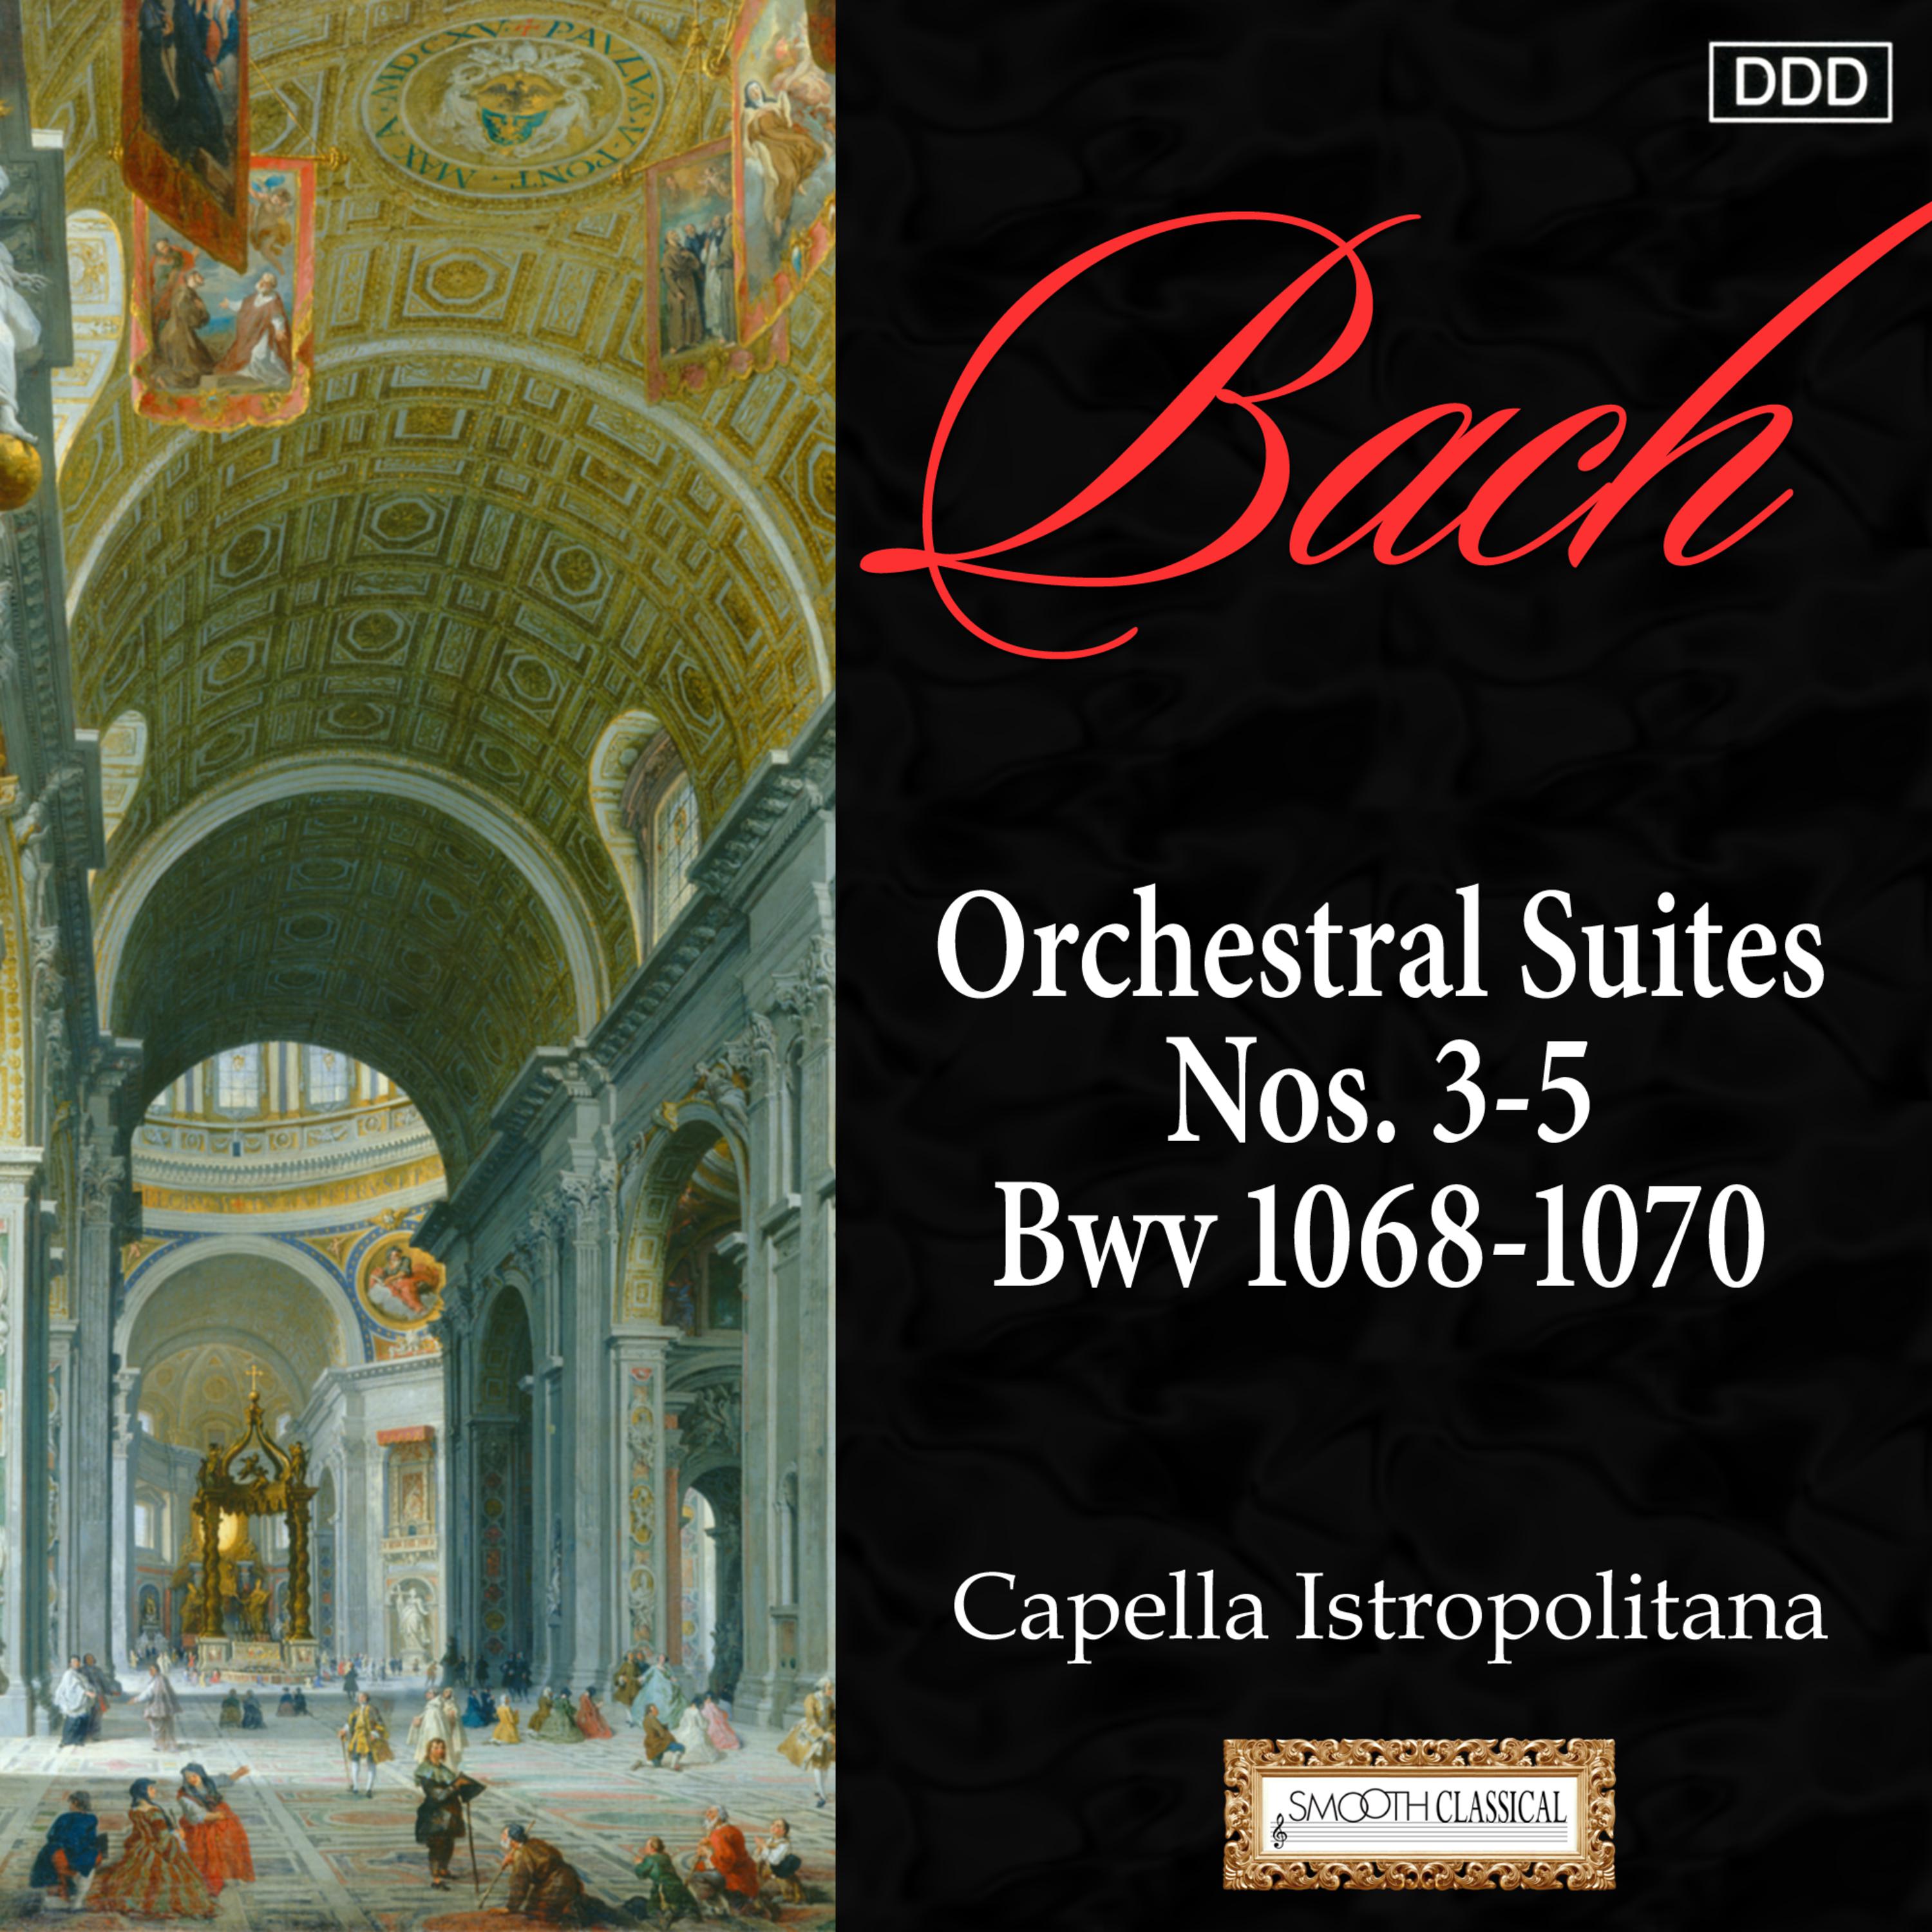 Orchestral Suite No. 4 in D Major, BWV 1069: II. Bourree I and II